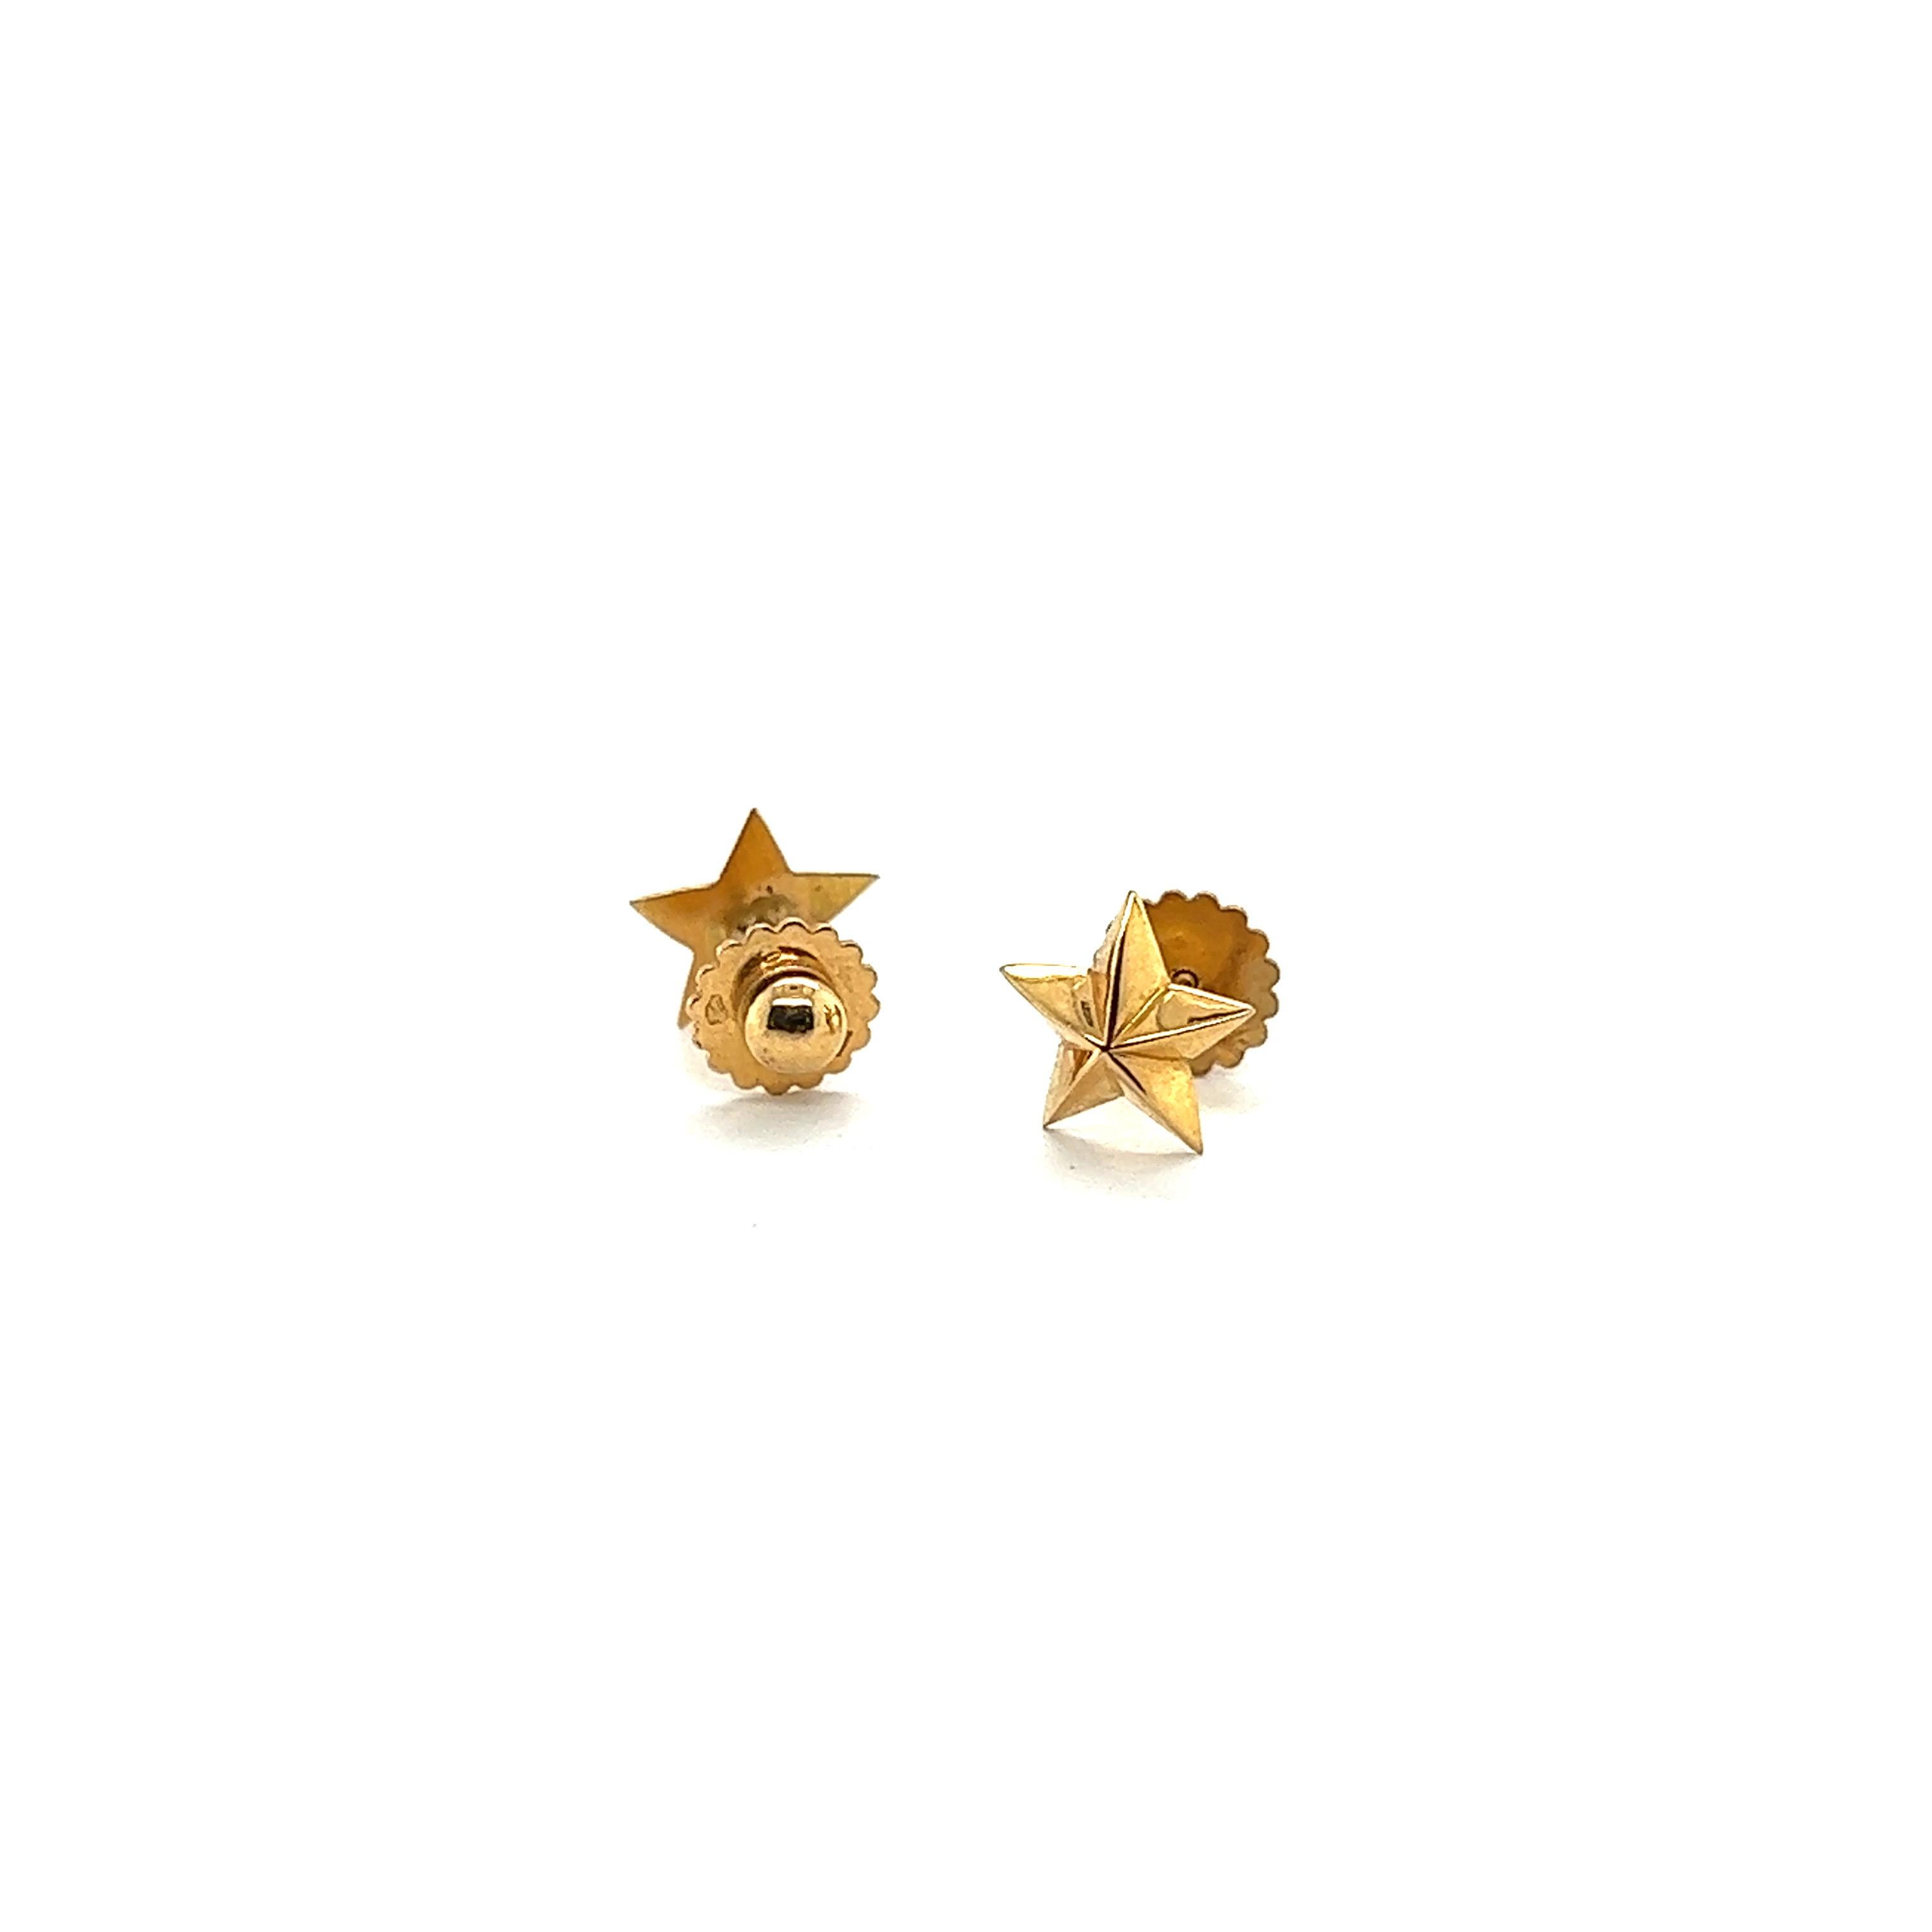 Modern Vintage French Star Shaped Earrings Yellow Gold 18 Karat For Sale